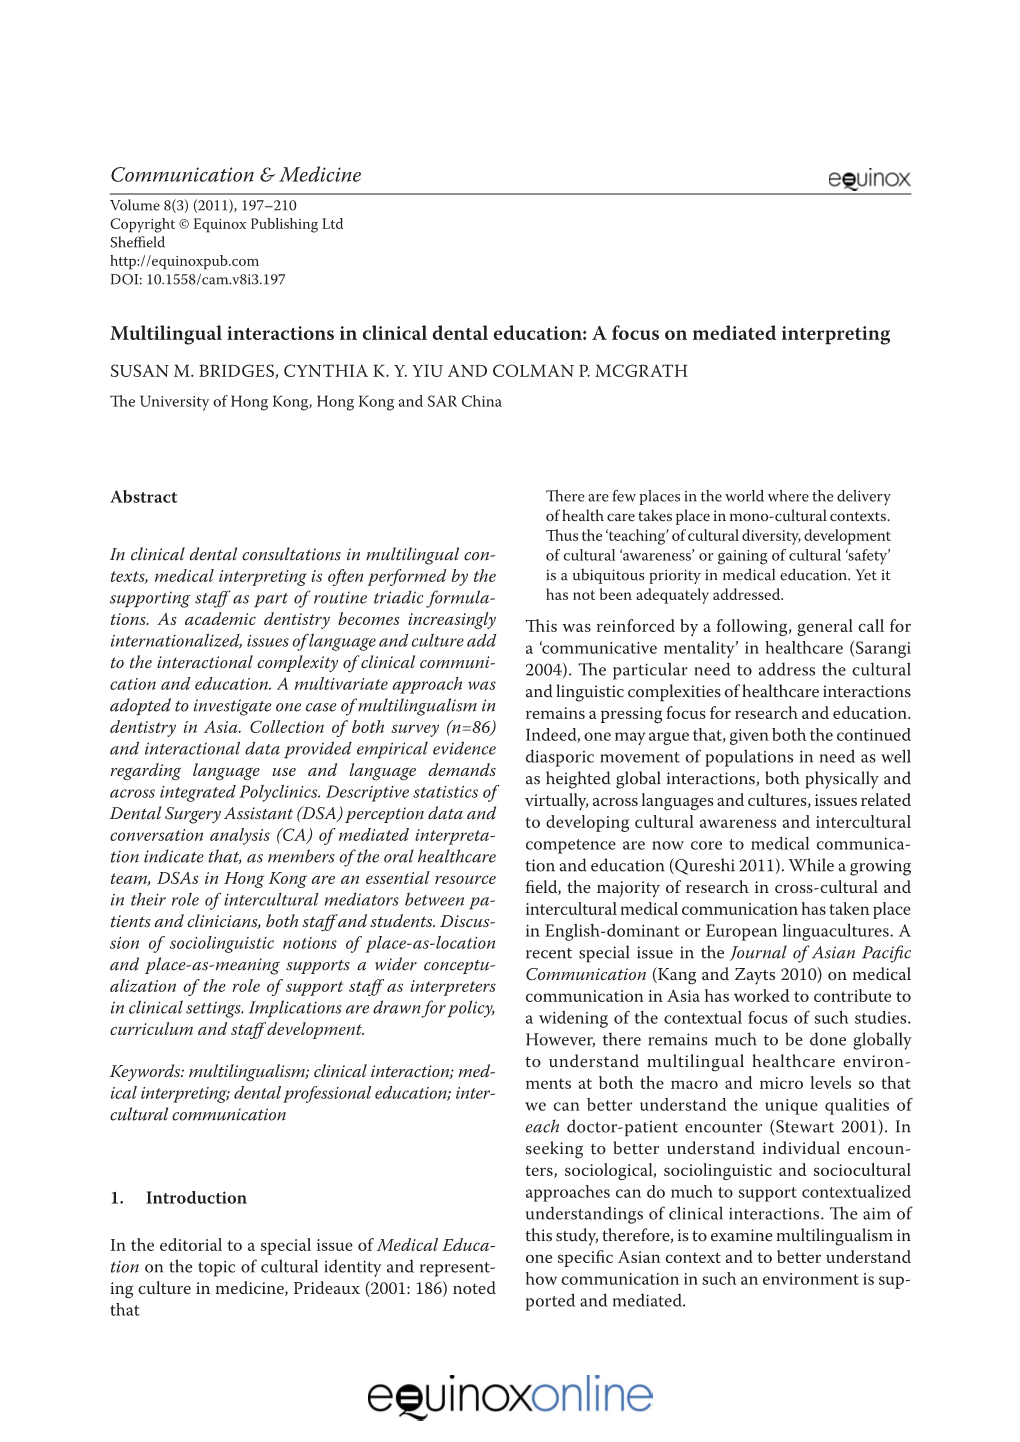 Multilingual Interactions in Clinical Dental Education: a Focus on Mediated Interpreting Susan M